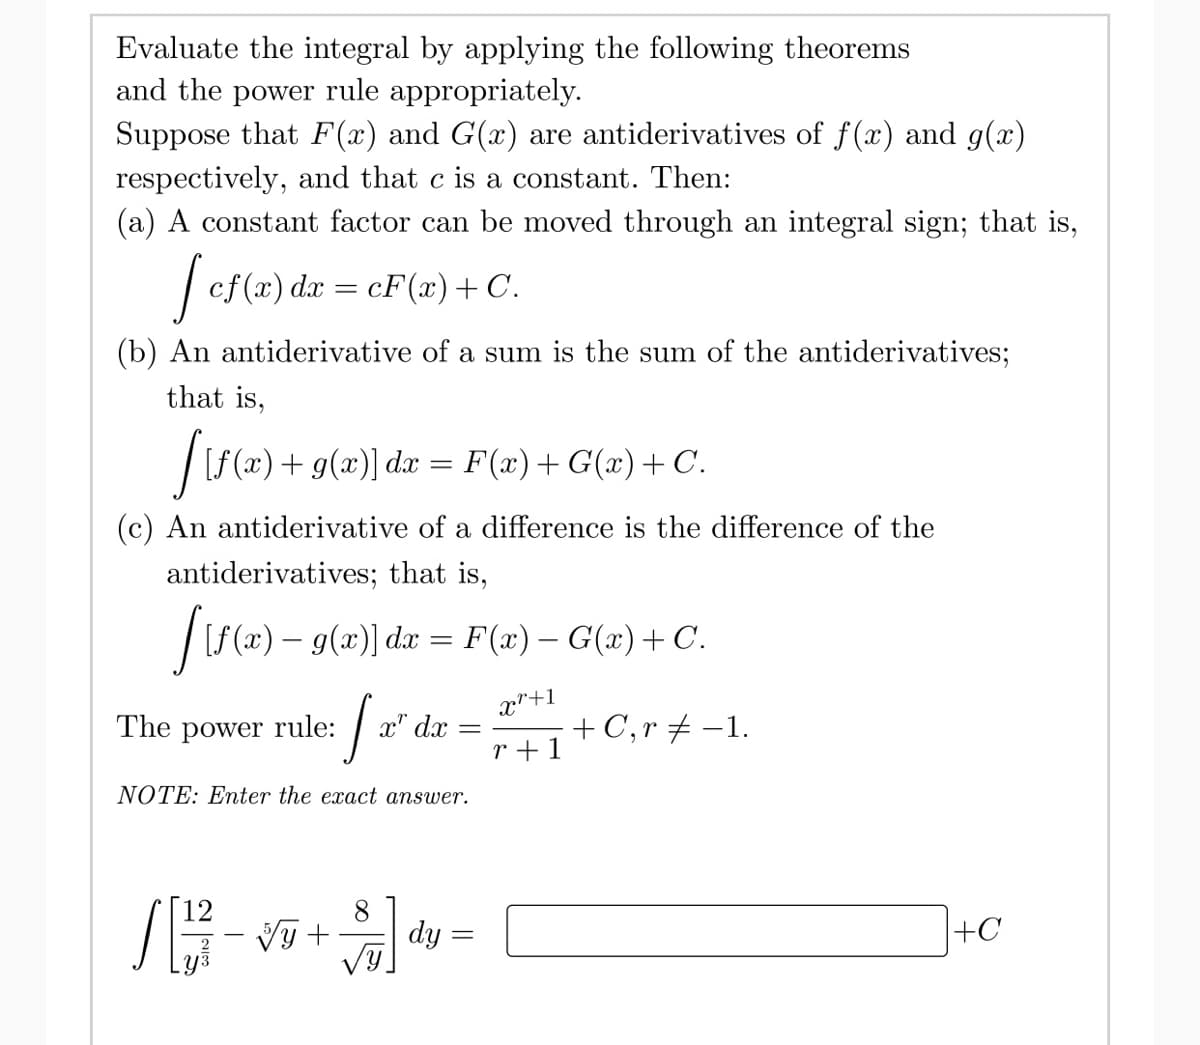 Evaluate the integral by applying the following theorems
and the power rule appropriately.
Suppose that F(x) and G(x) are antiderivatives of f(x) and g(x)
respectively, and that c is a constant. Then:
(a) A constant factor can be moved through an integral sign; that is,
[ cf(x) dx = cF(x) + C.
(b) An antiderivative of a sum is the sum of the antiderivatives;
that is,
[[f(x) + g(x)] da
F(x) + G(x) + C.
(c) An antiderivative of a difference is the difference of the
antiderivatives; that is,
[ {f(x) — 9(x)] dx = F(x) − G(x) + C.
x"+1
r+1
=
The power rule:
[x
NOTE: Enter the exact answer.
x" dx
8
[[1²7 - √5 + $ª
=
dy=
=
+ C, r = -1.
+C